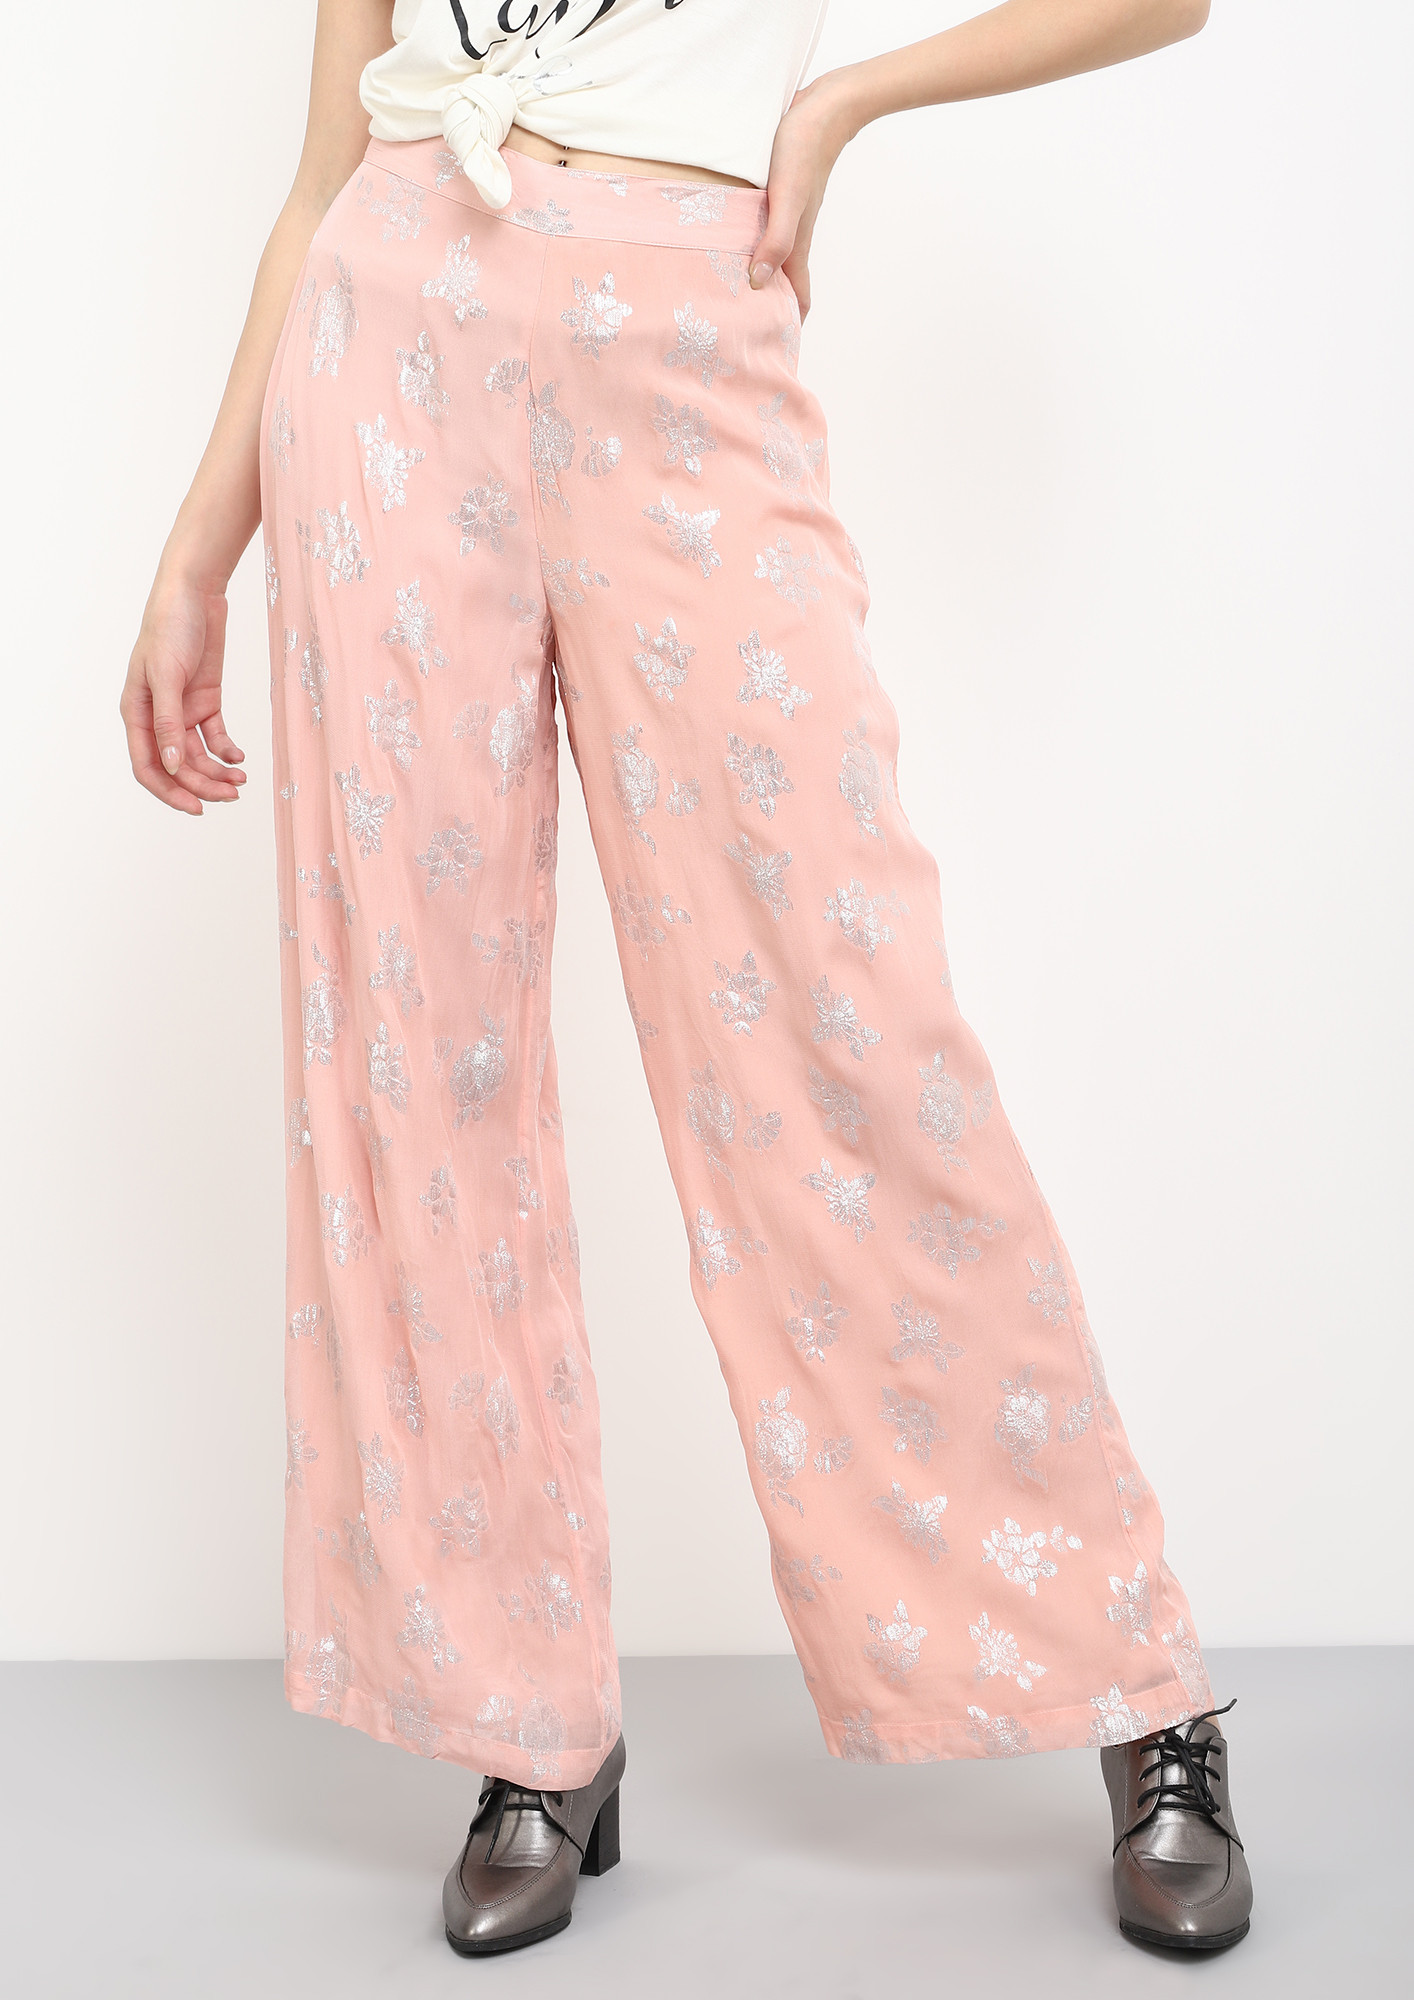 DAY DREAMING IN PEACH PALAZZOS